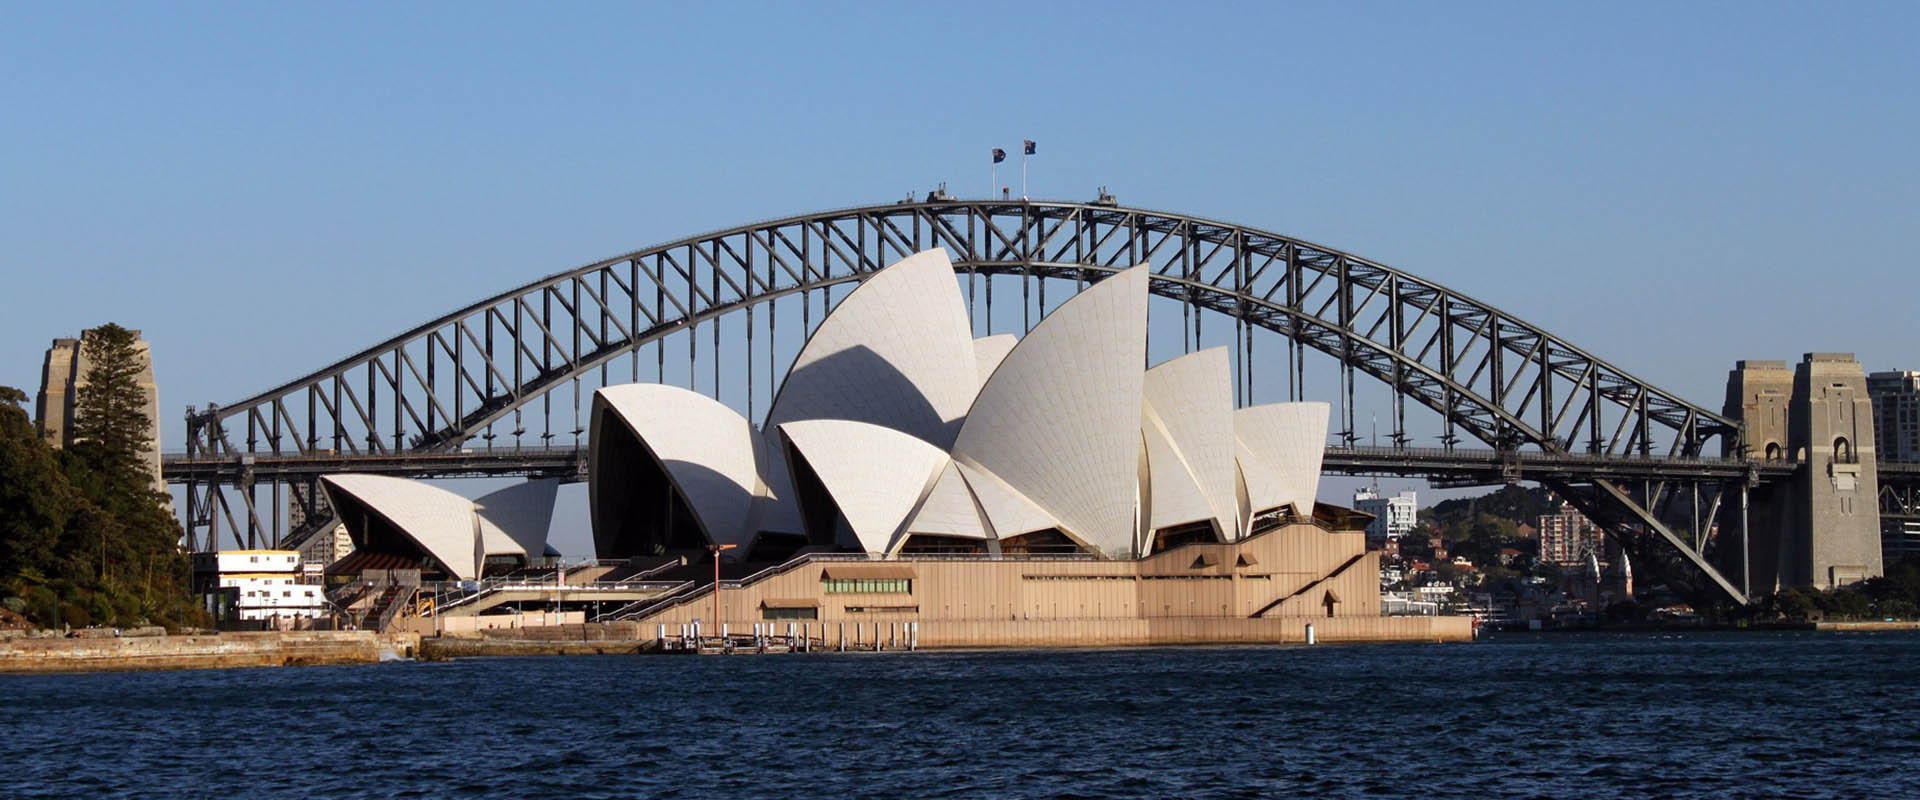 Tourist Attractions In Sydney